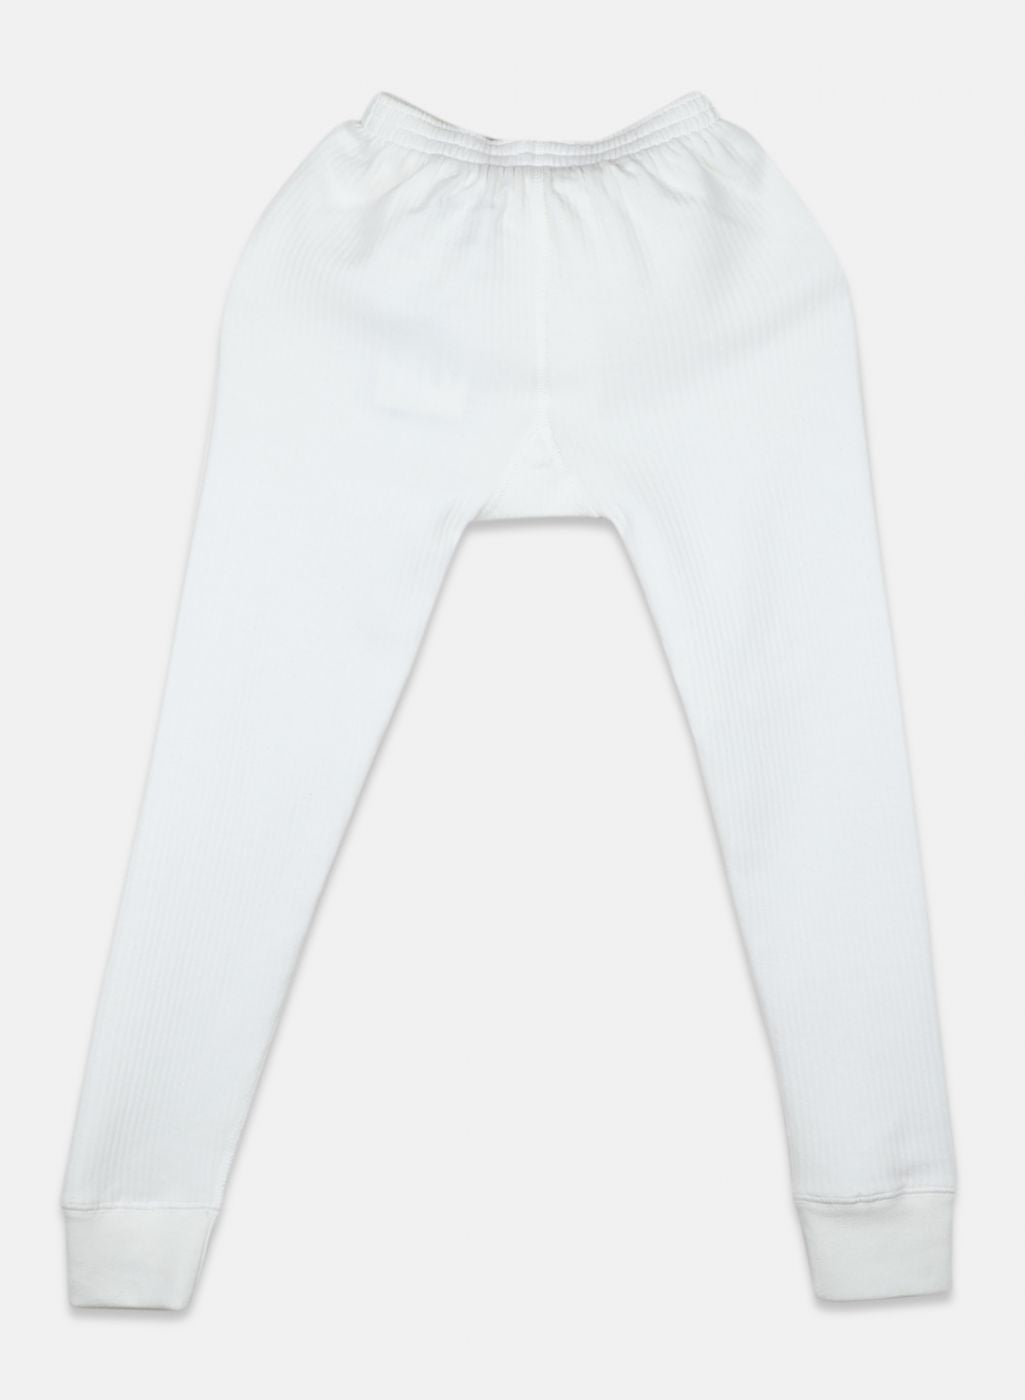 Boys Off White Solid Thermal Lower